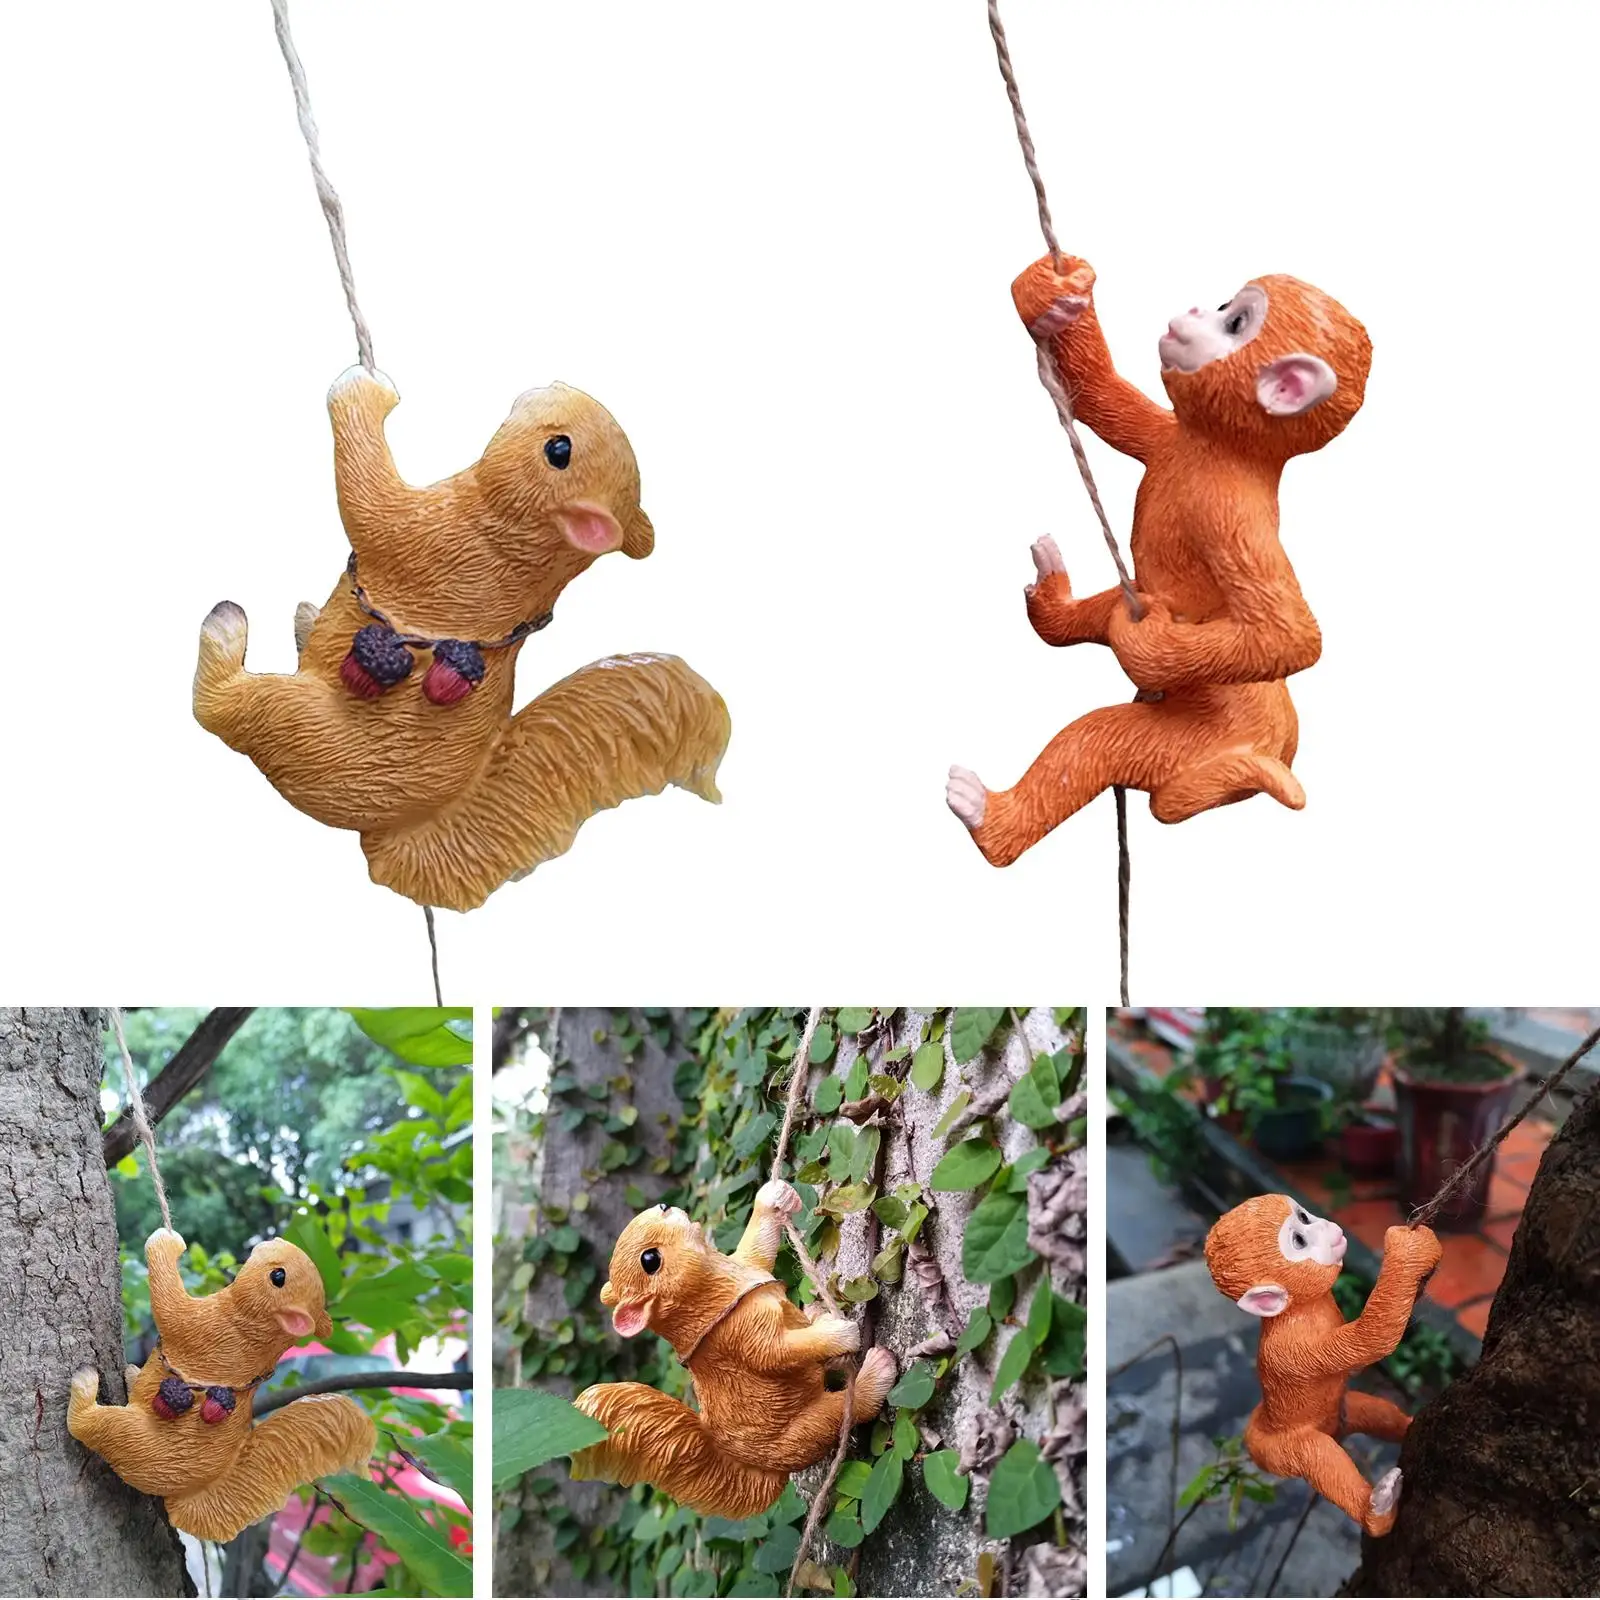 Climbing Animal Figurine Sculpture Ornament Handmade Statue Resin Plant Pot Hanger for Lawn Outdoor Courtyard Home Decoration